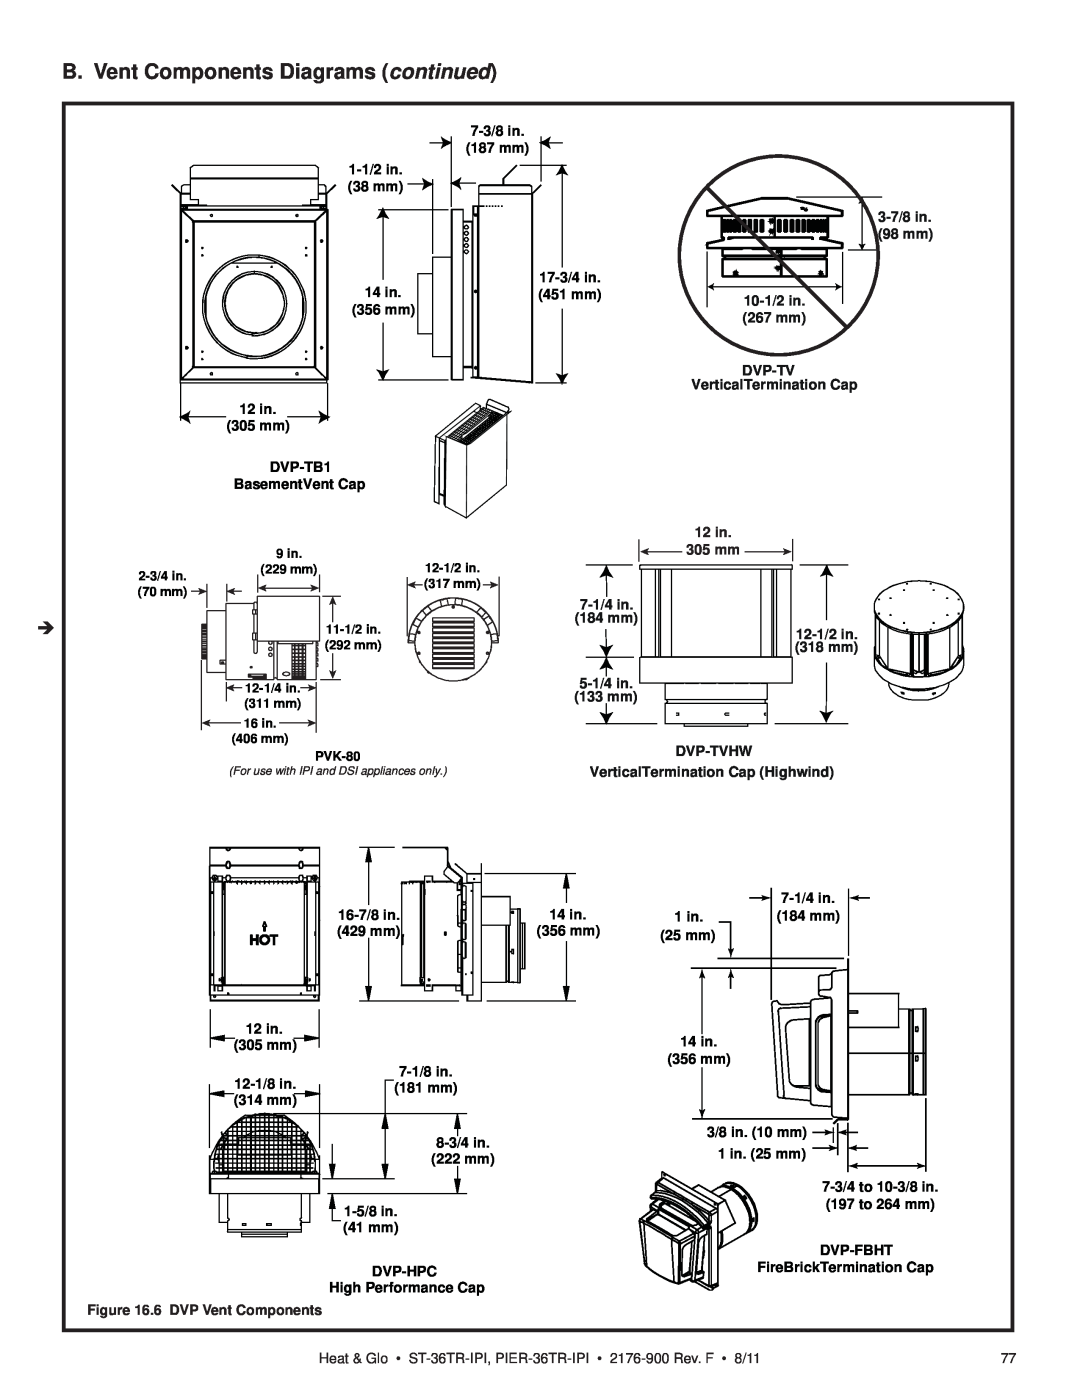 Heat & Glo LifeStyle PIER-36TR-IPI B. Vent Components Diagrams continued, 3-7/8 in, 98 mm, 10-1/2 in, 267 mm, Dvp-Tv, 8/11 